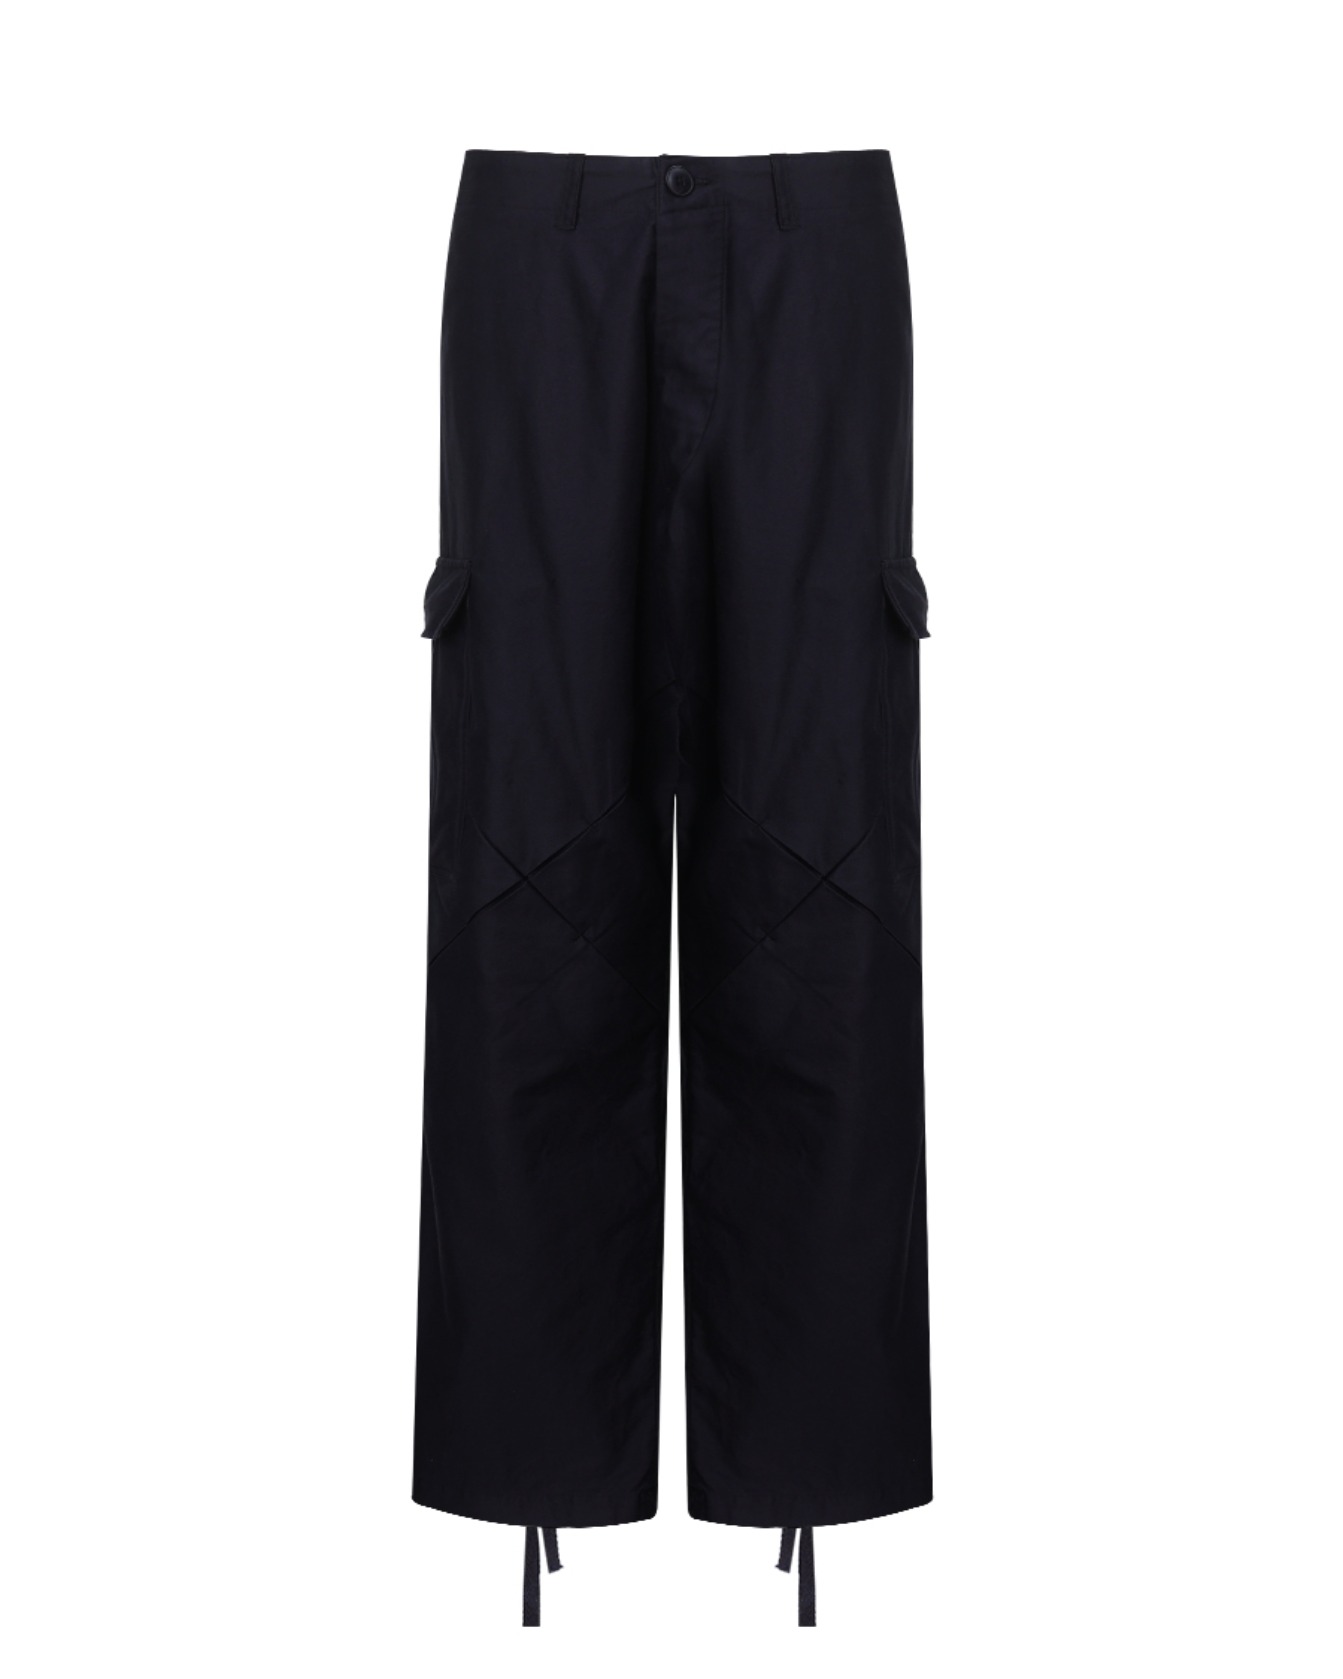 X M51 TROUSERS (NAVY)